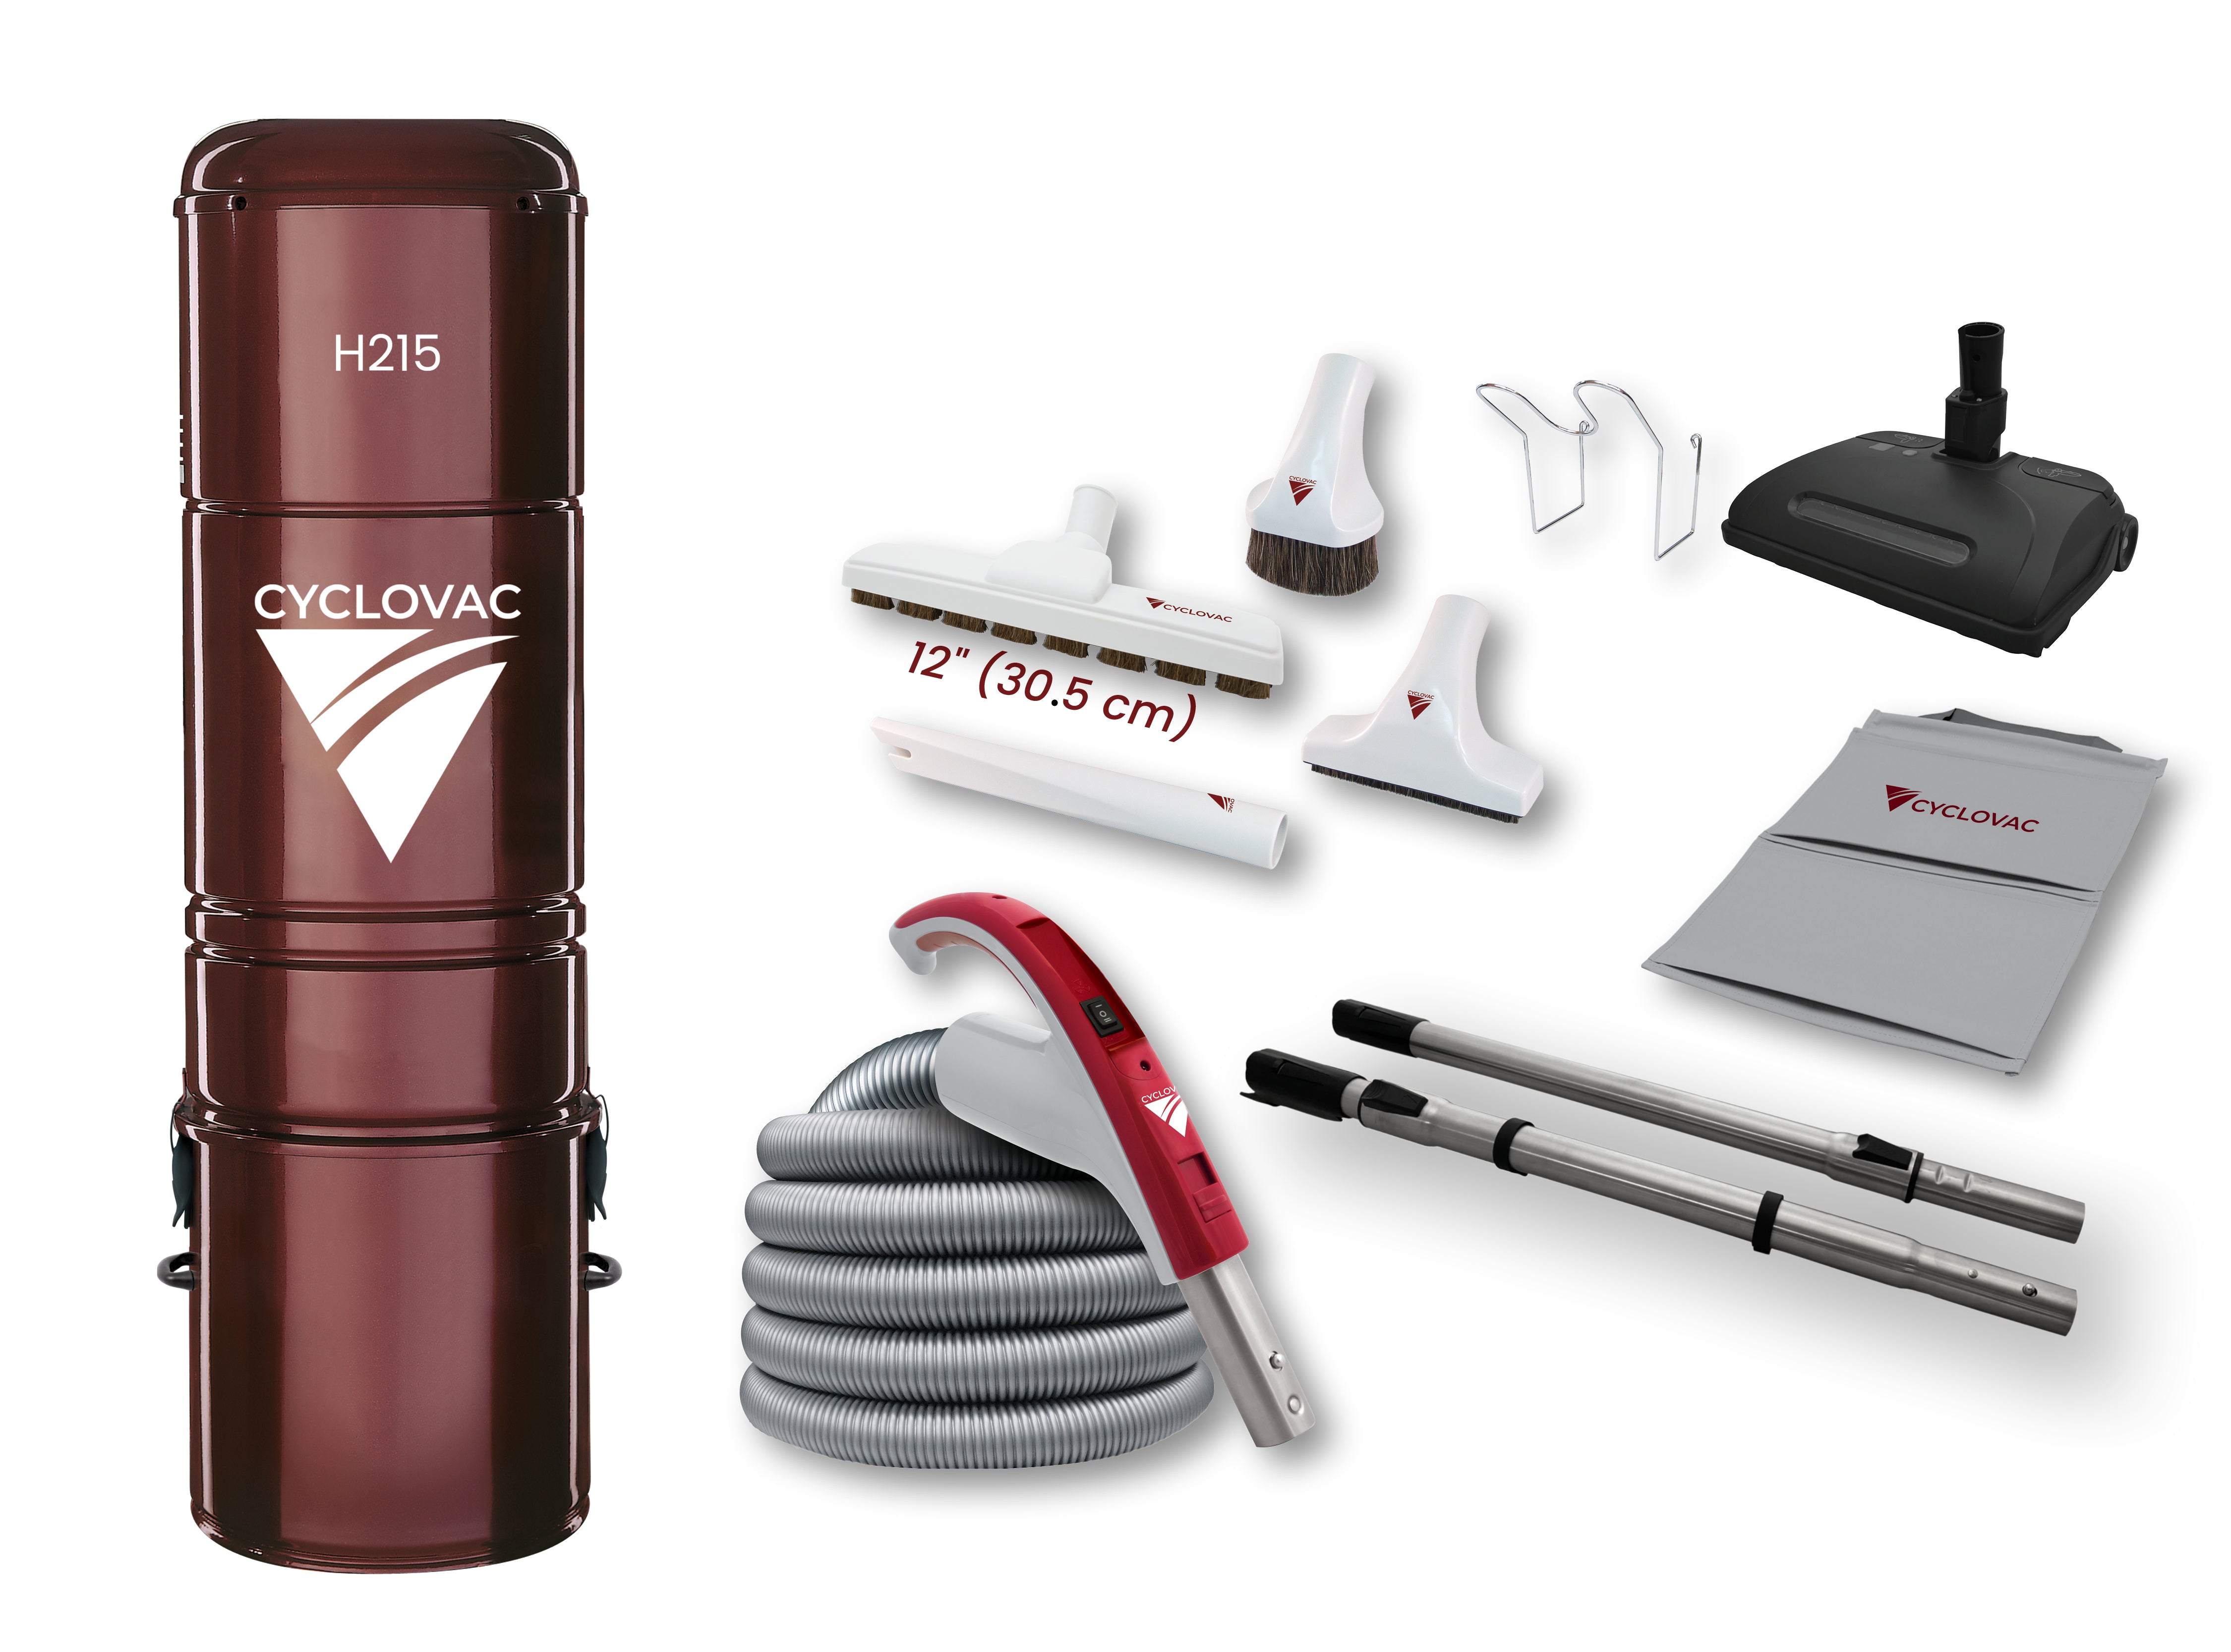 Cyclovac H215 Central Vacuum Cleaner with Super Luxe Brush Kit & Electric Power Nozzle